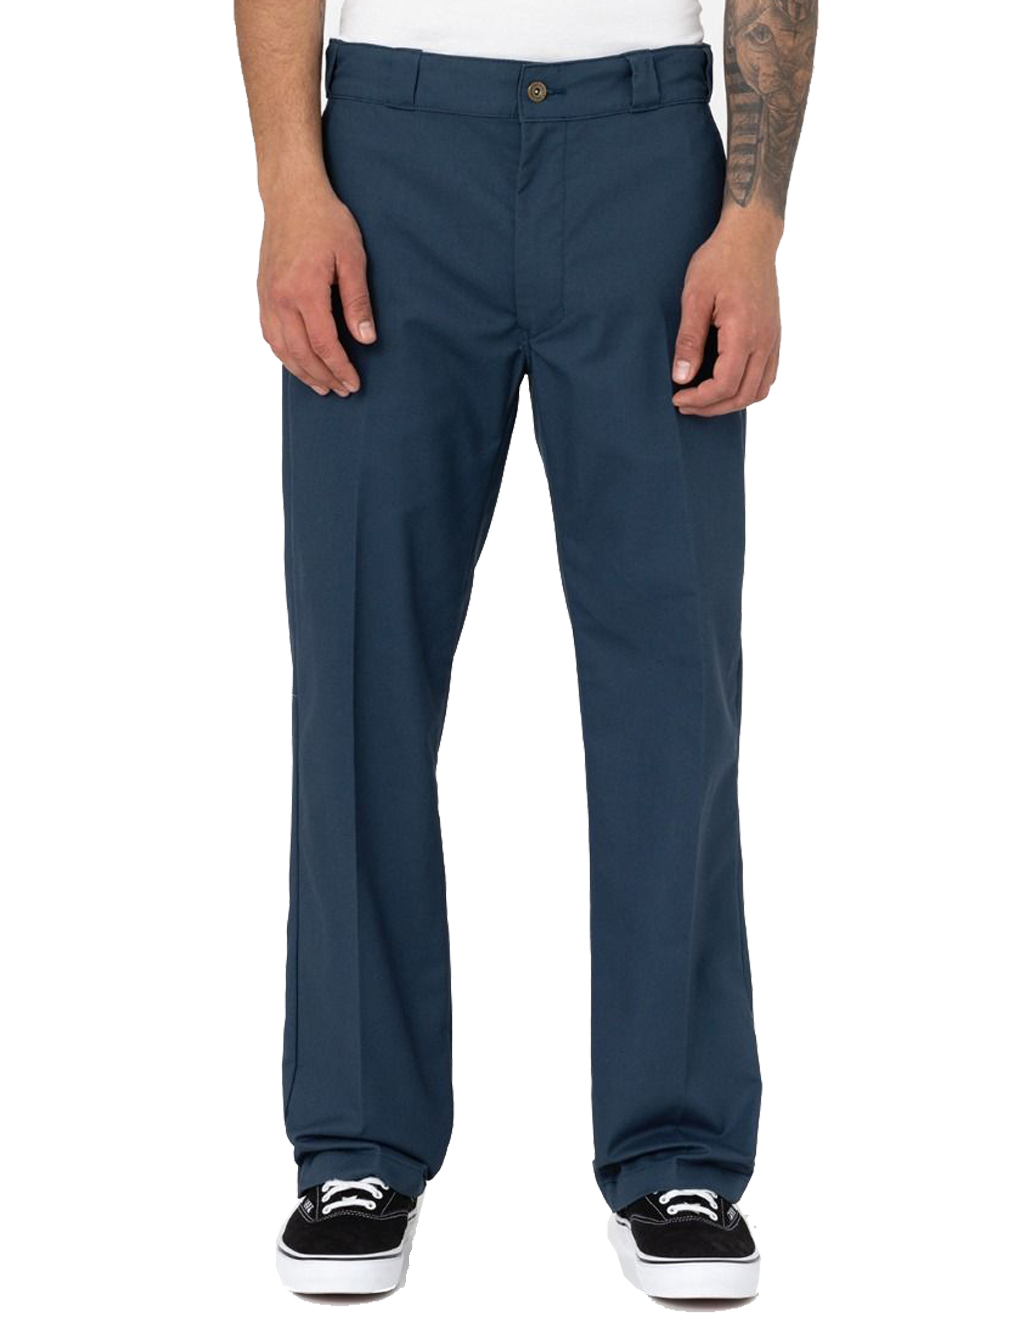 Dickies - O-Dog 874 Traditional Work Pant - Navy Blue